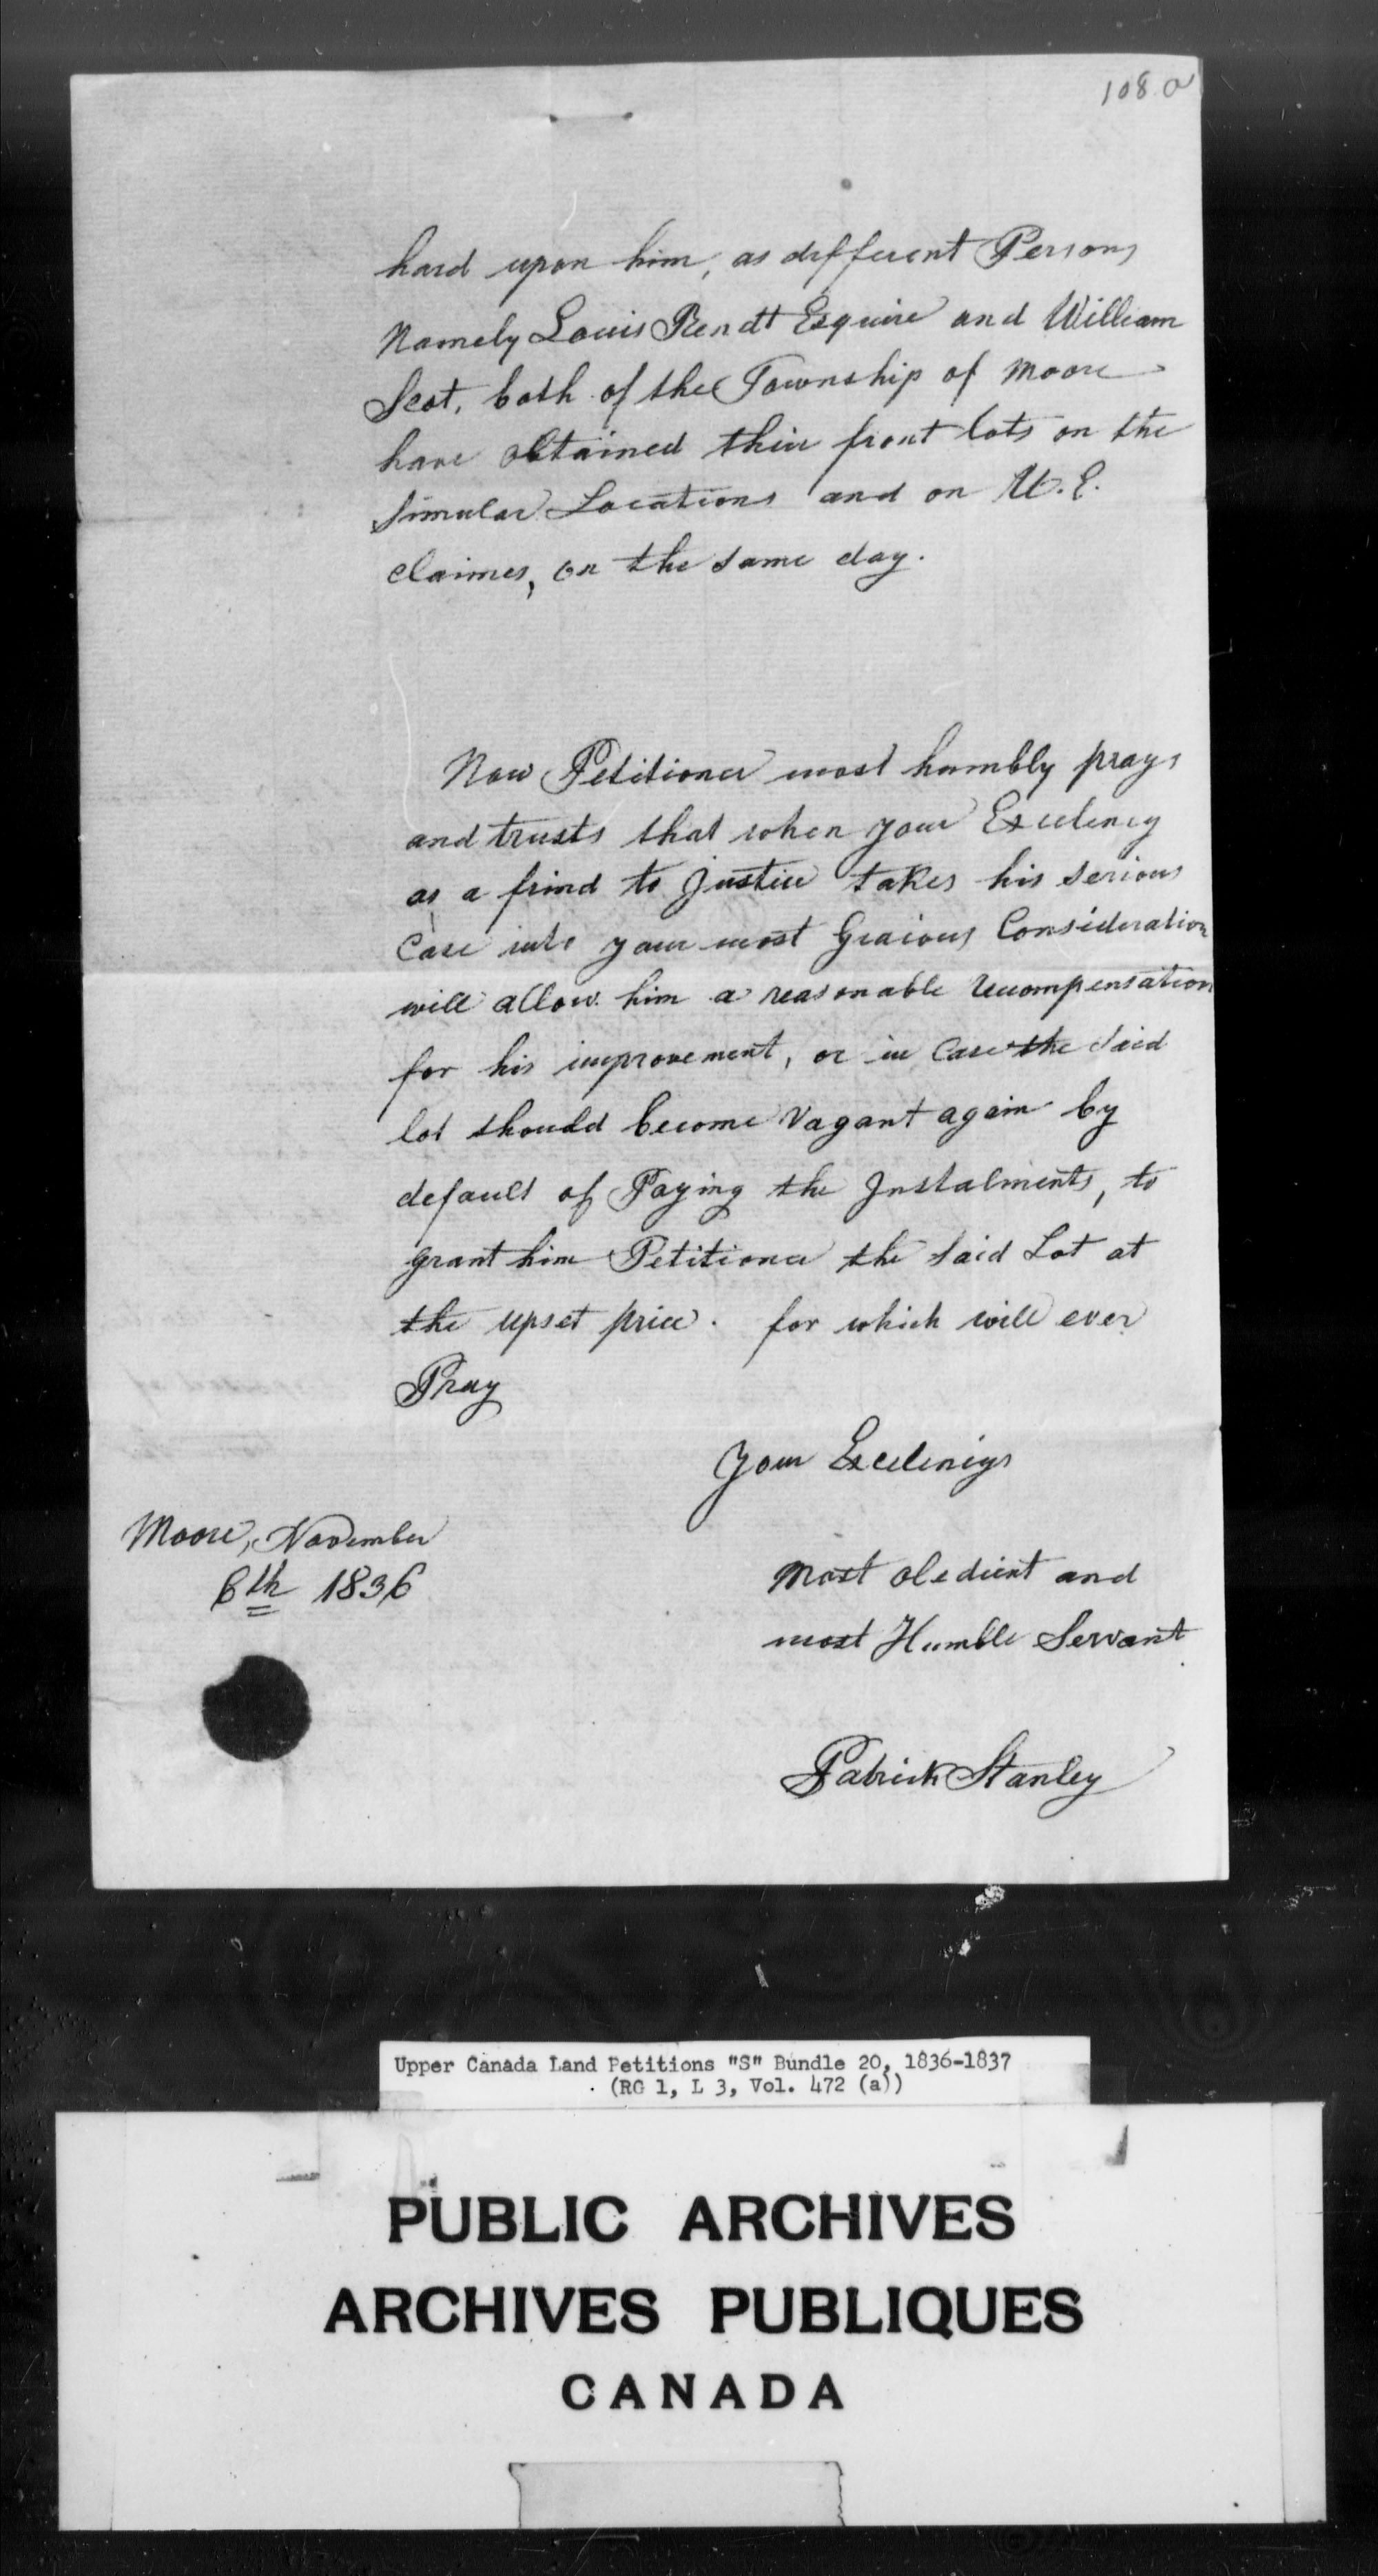 Title: Upper Canada Land Petitions (1763-1865) - Mikan Number: 205131 - Microform: c-2819